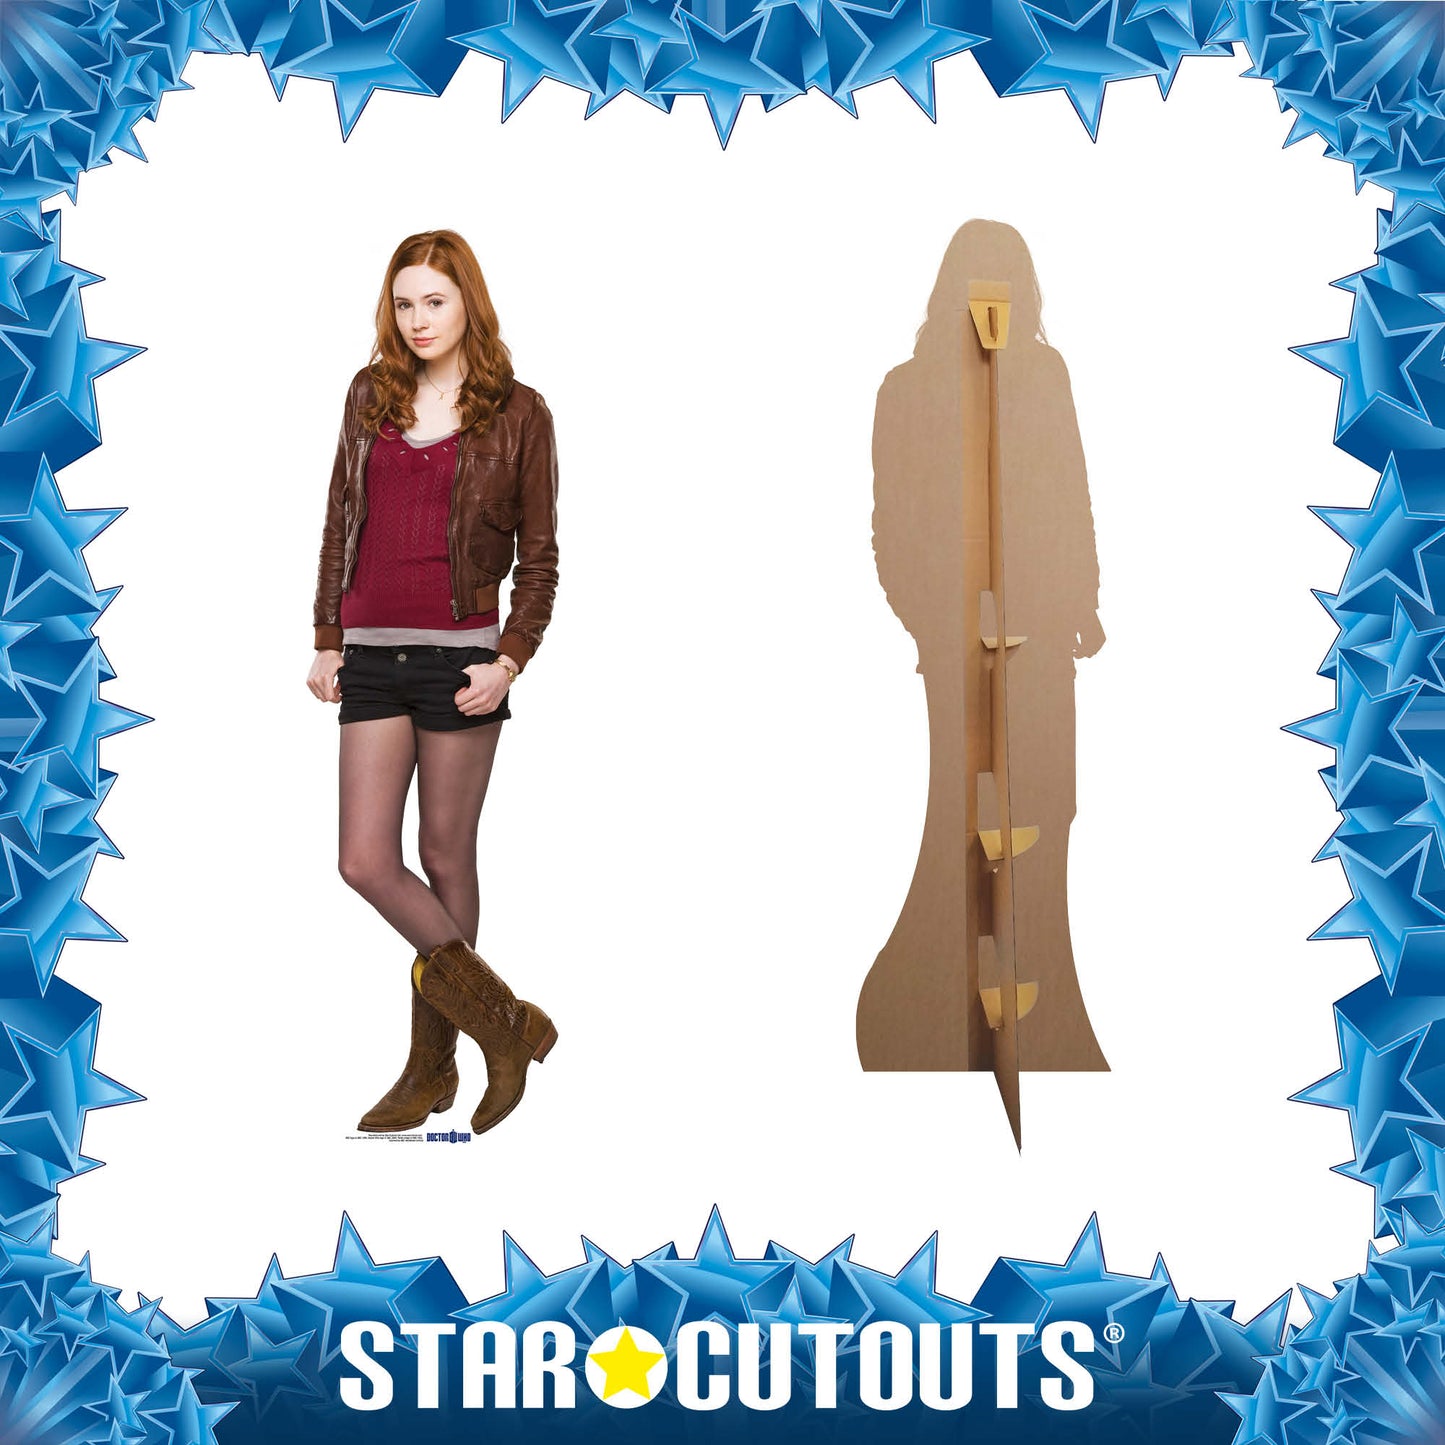 Amy Pond Cardboard Cut Out Height 176cm - Star Cutouts